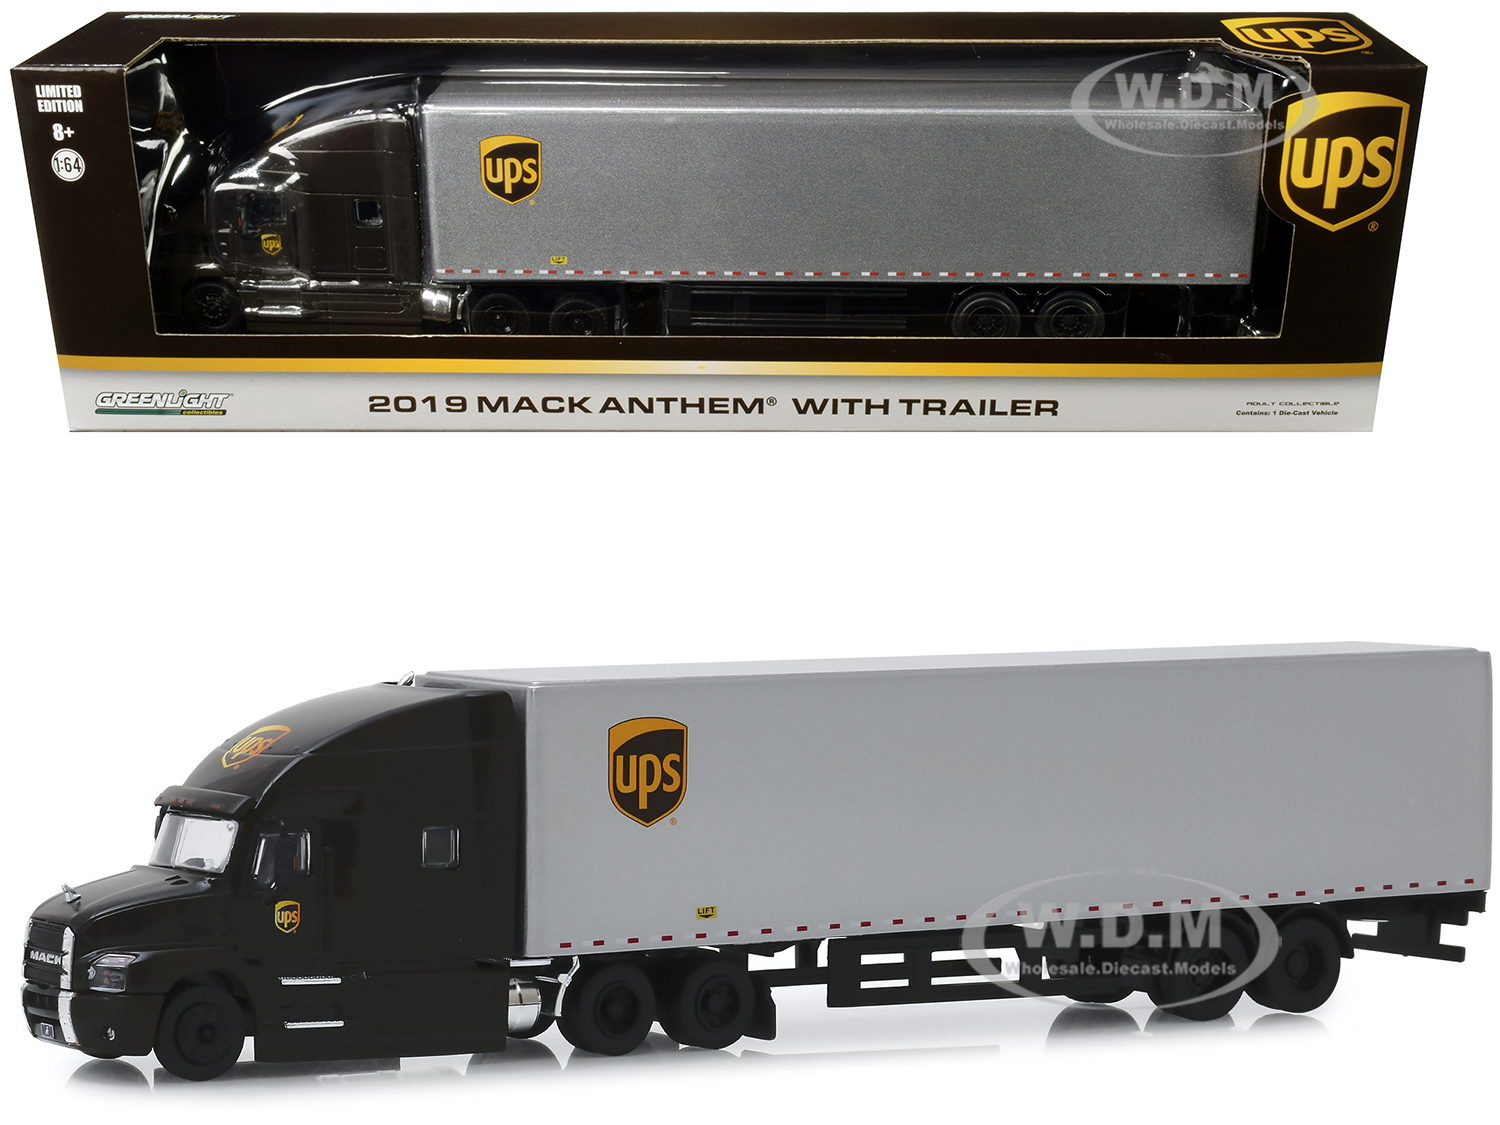 2019 Mack Anthem with Trailer "United Parcel Service" (UPS) Brown and Silver 1/64 Diecast Model by Greenlight